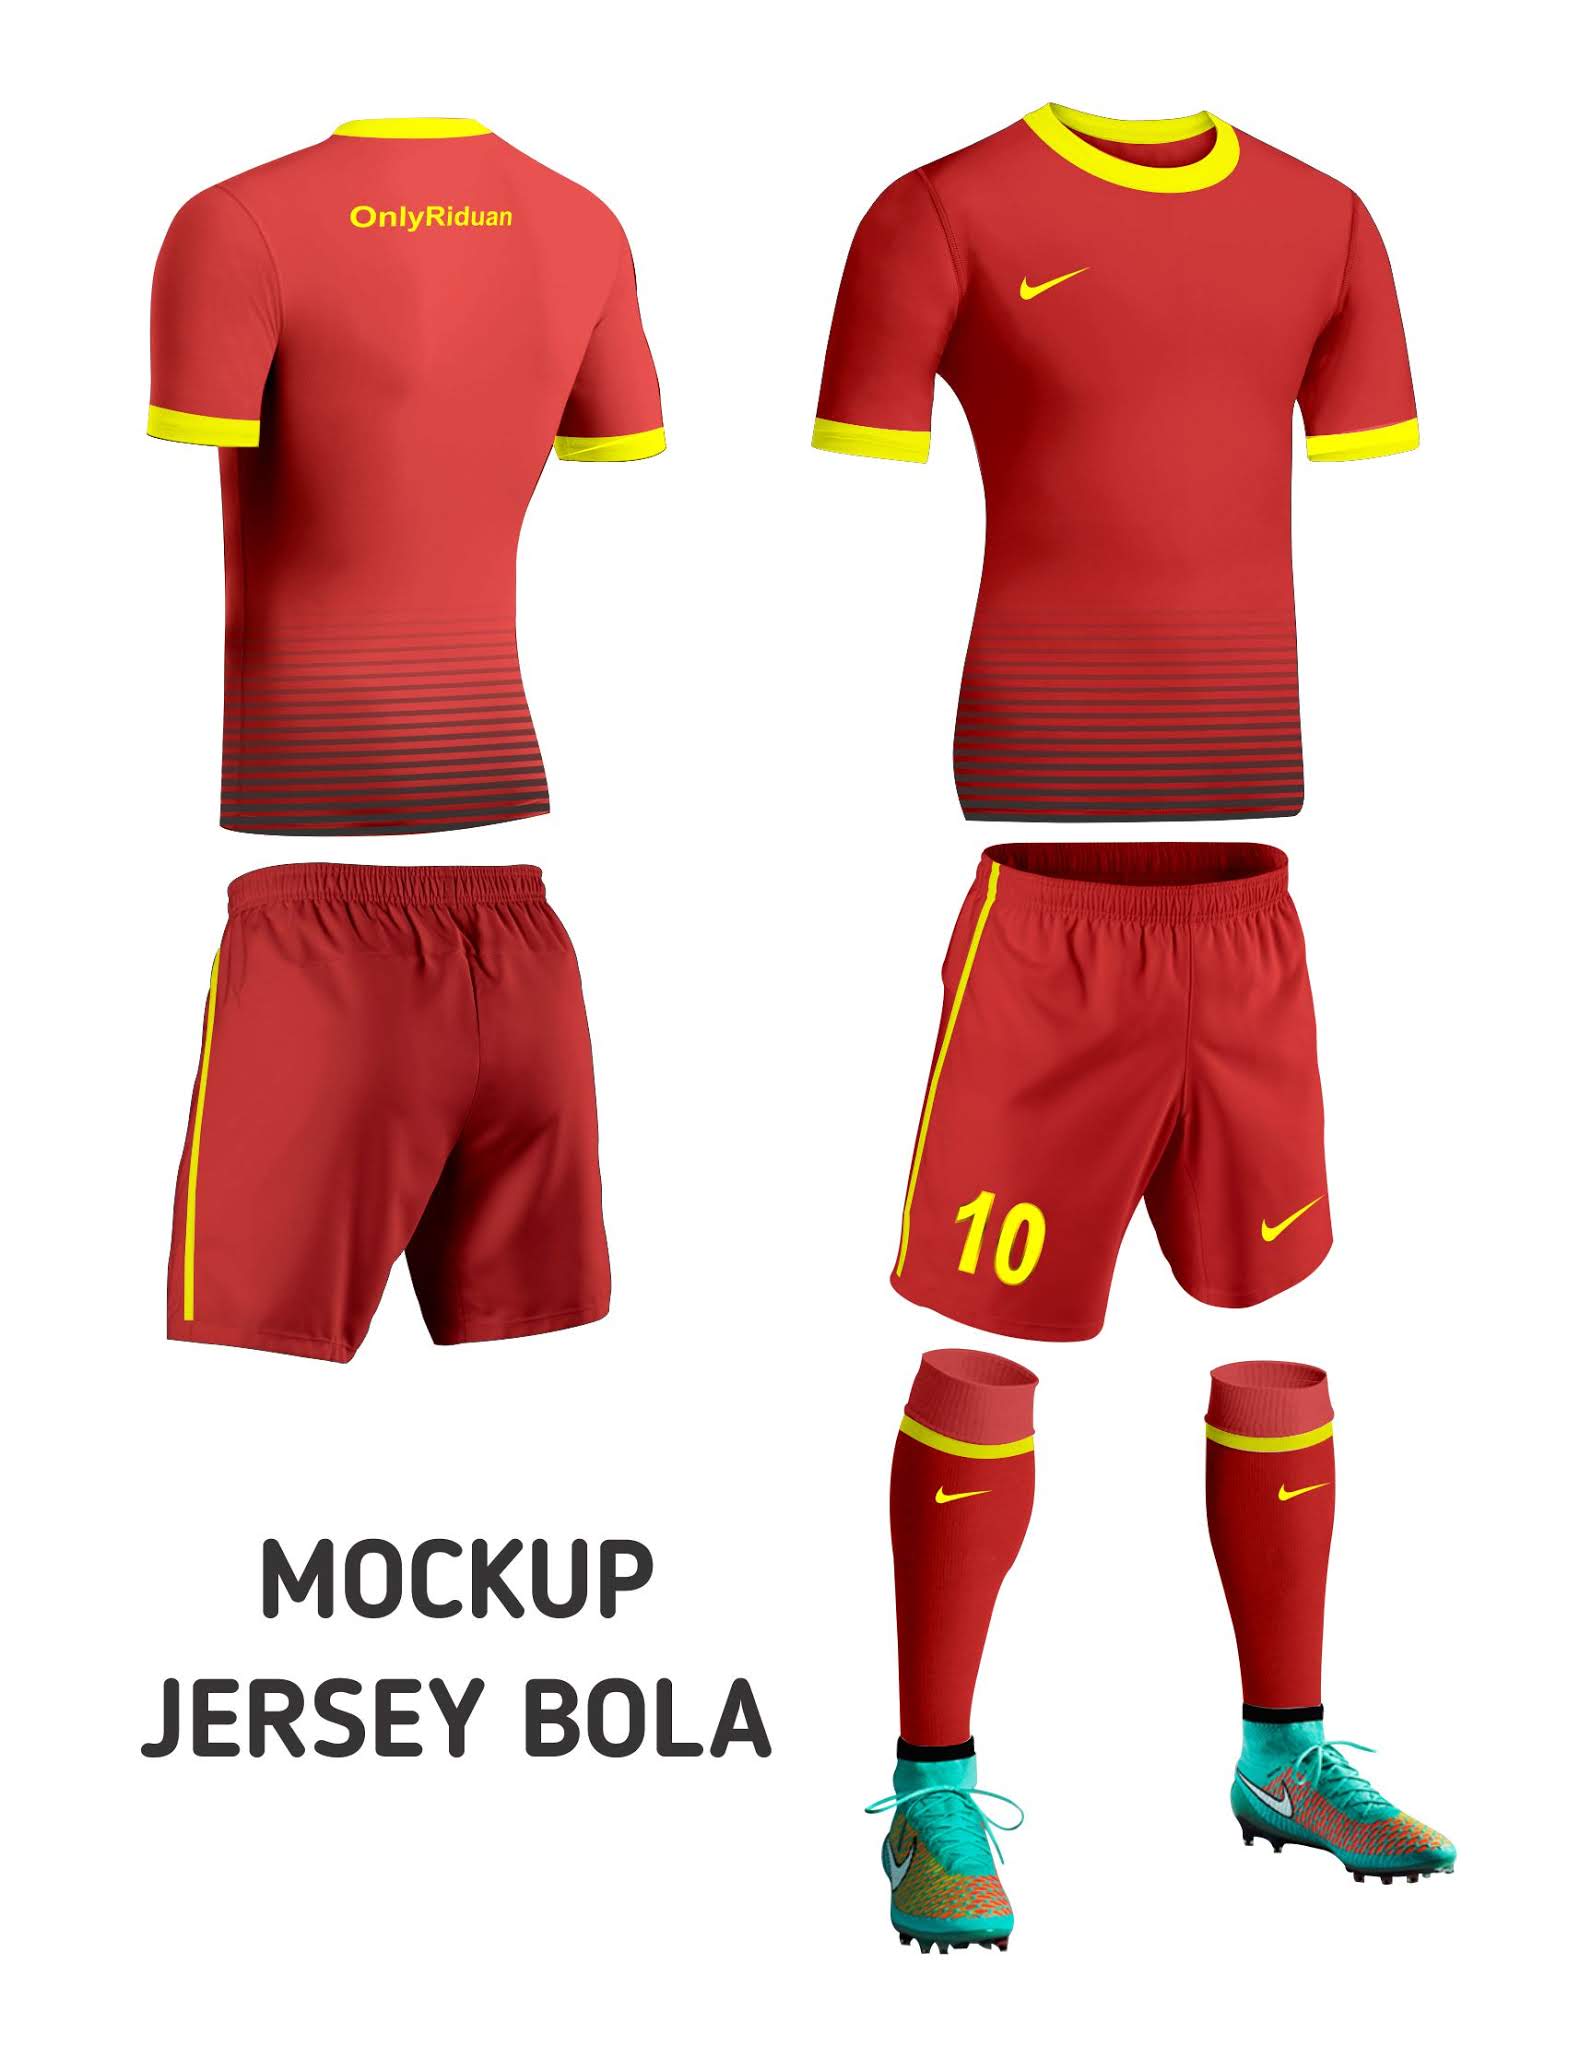 Download 354+ Mockup Jersey Bola Best Quality Mockups PSD these mockups if you need to present your logo and other branding projects.